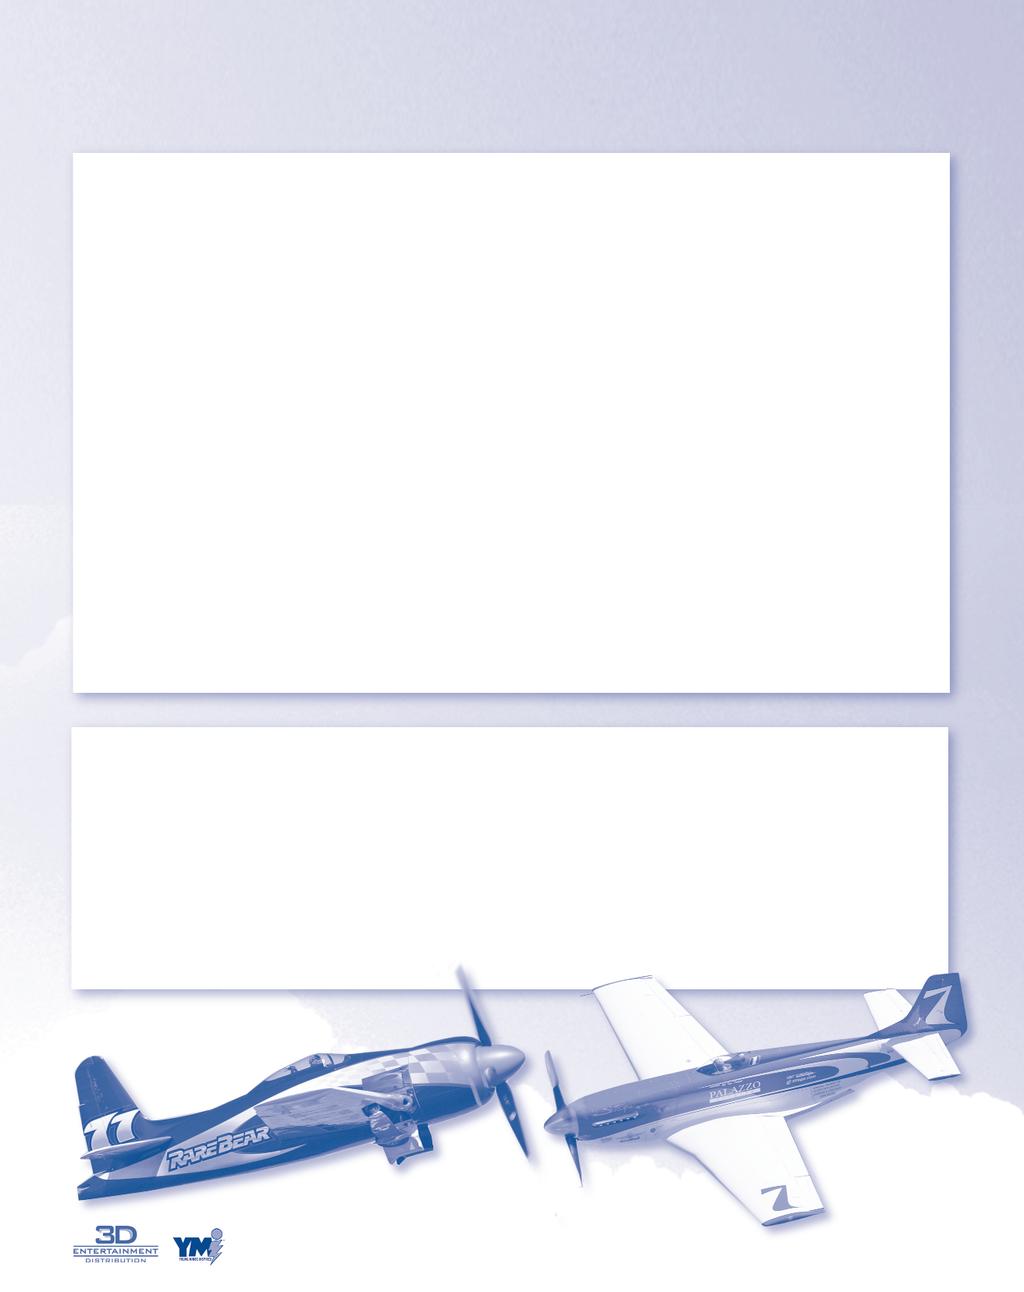 REPRODUCIBLE MASTER GRADES 6-9 (AGES 11-14) ACTIVITY 4 BUILT FOR SPEED When you see the exciting new film Air Racers, you ll see that airplane wings come in different shapes and sizes, but a wing s